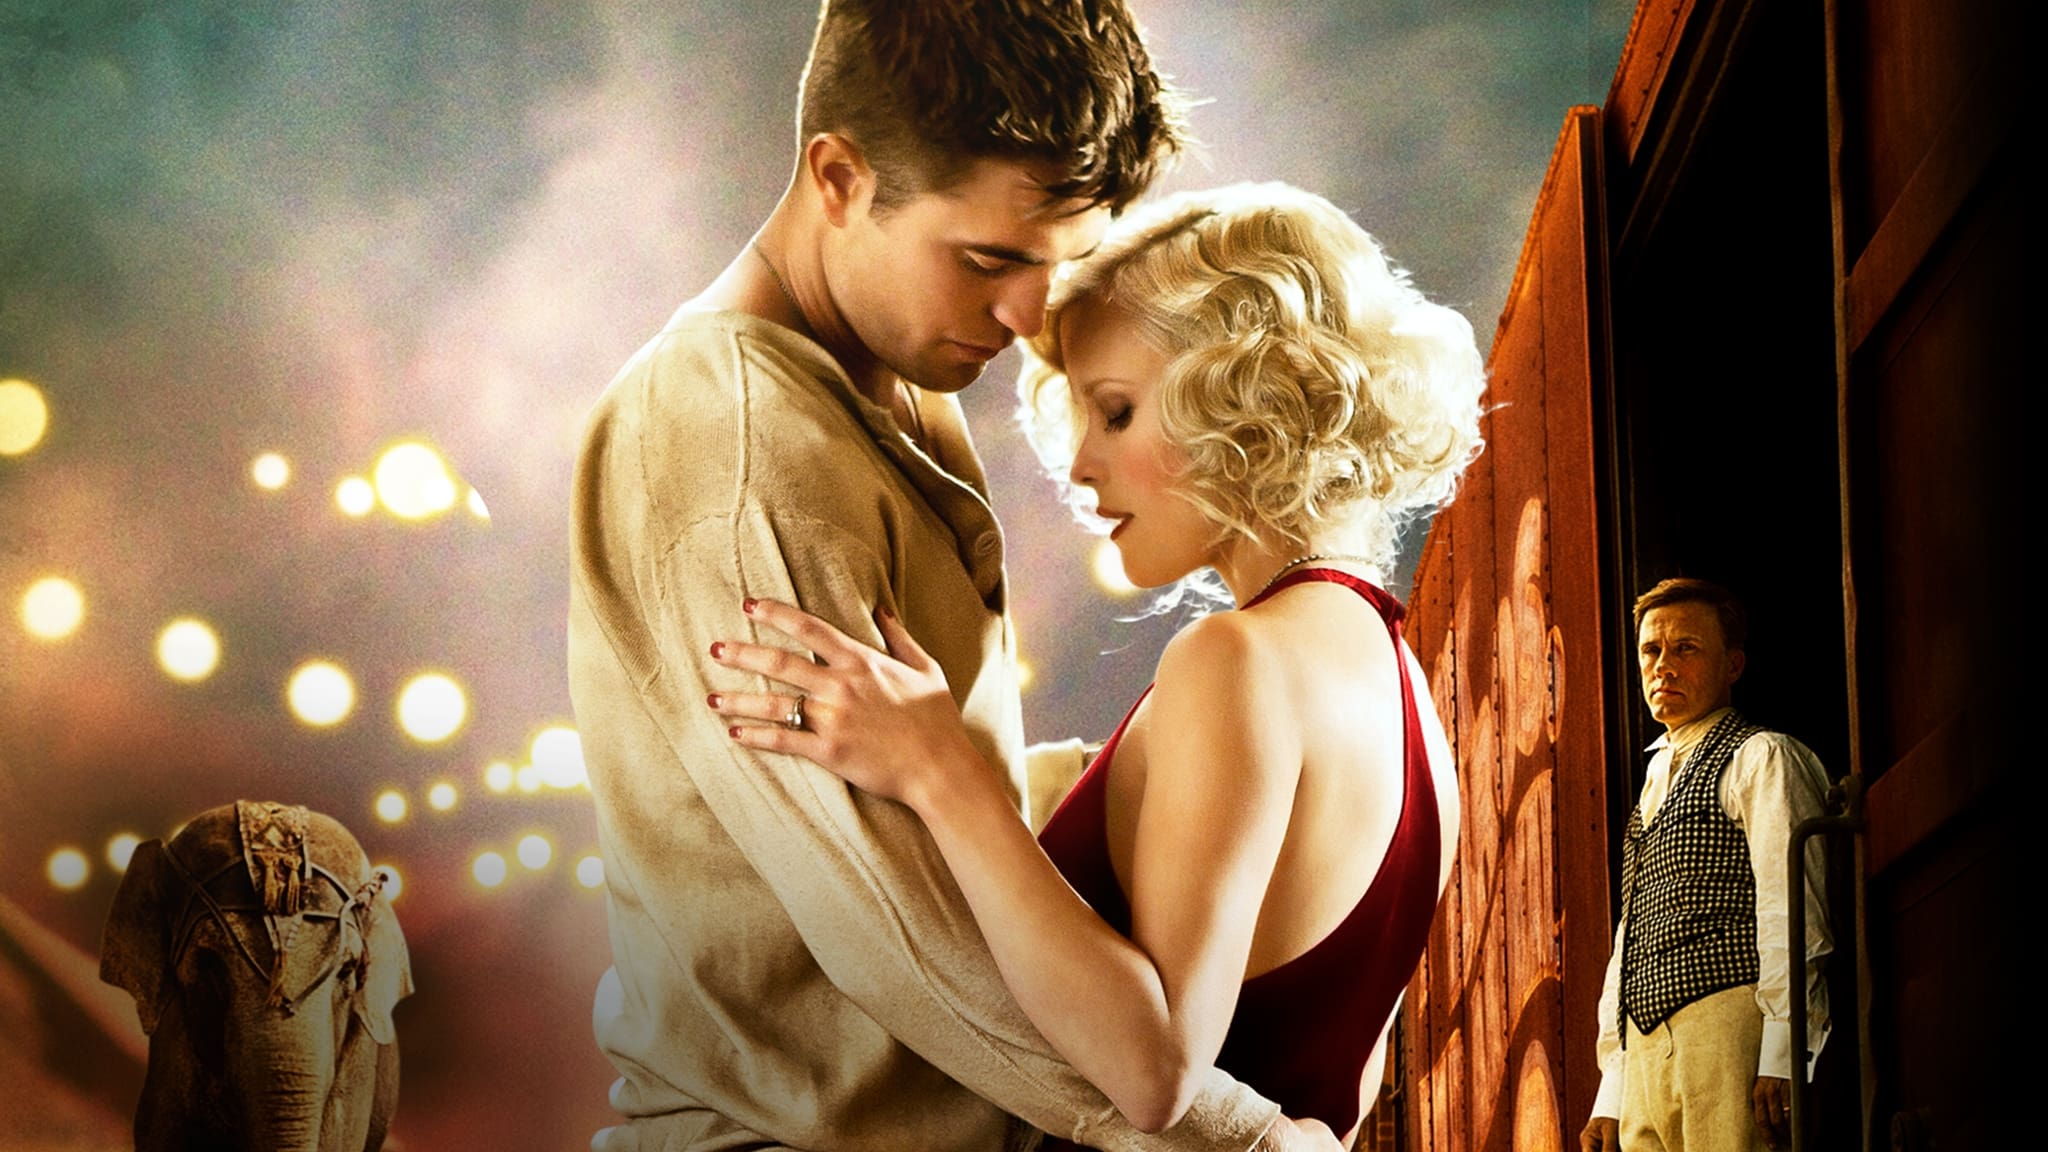 Water for Elephants 2011 123movies